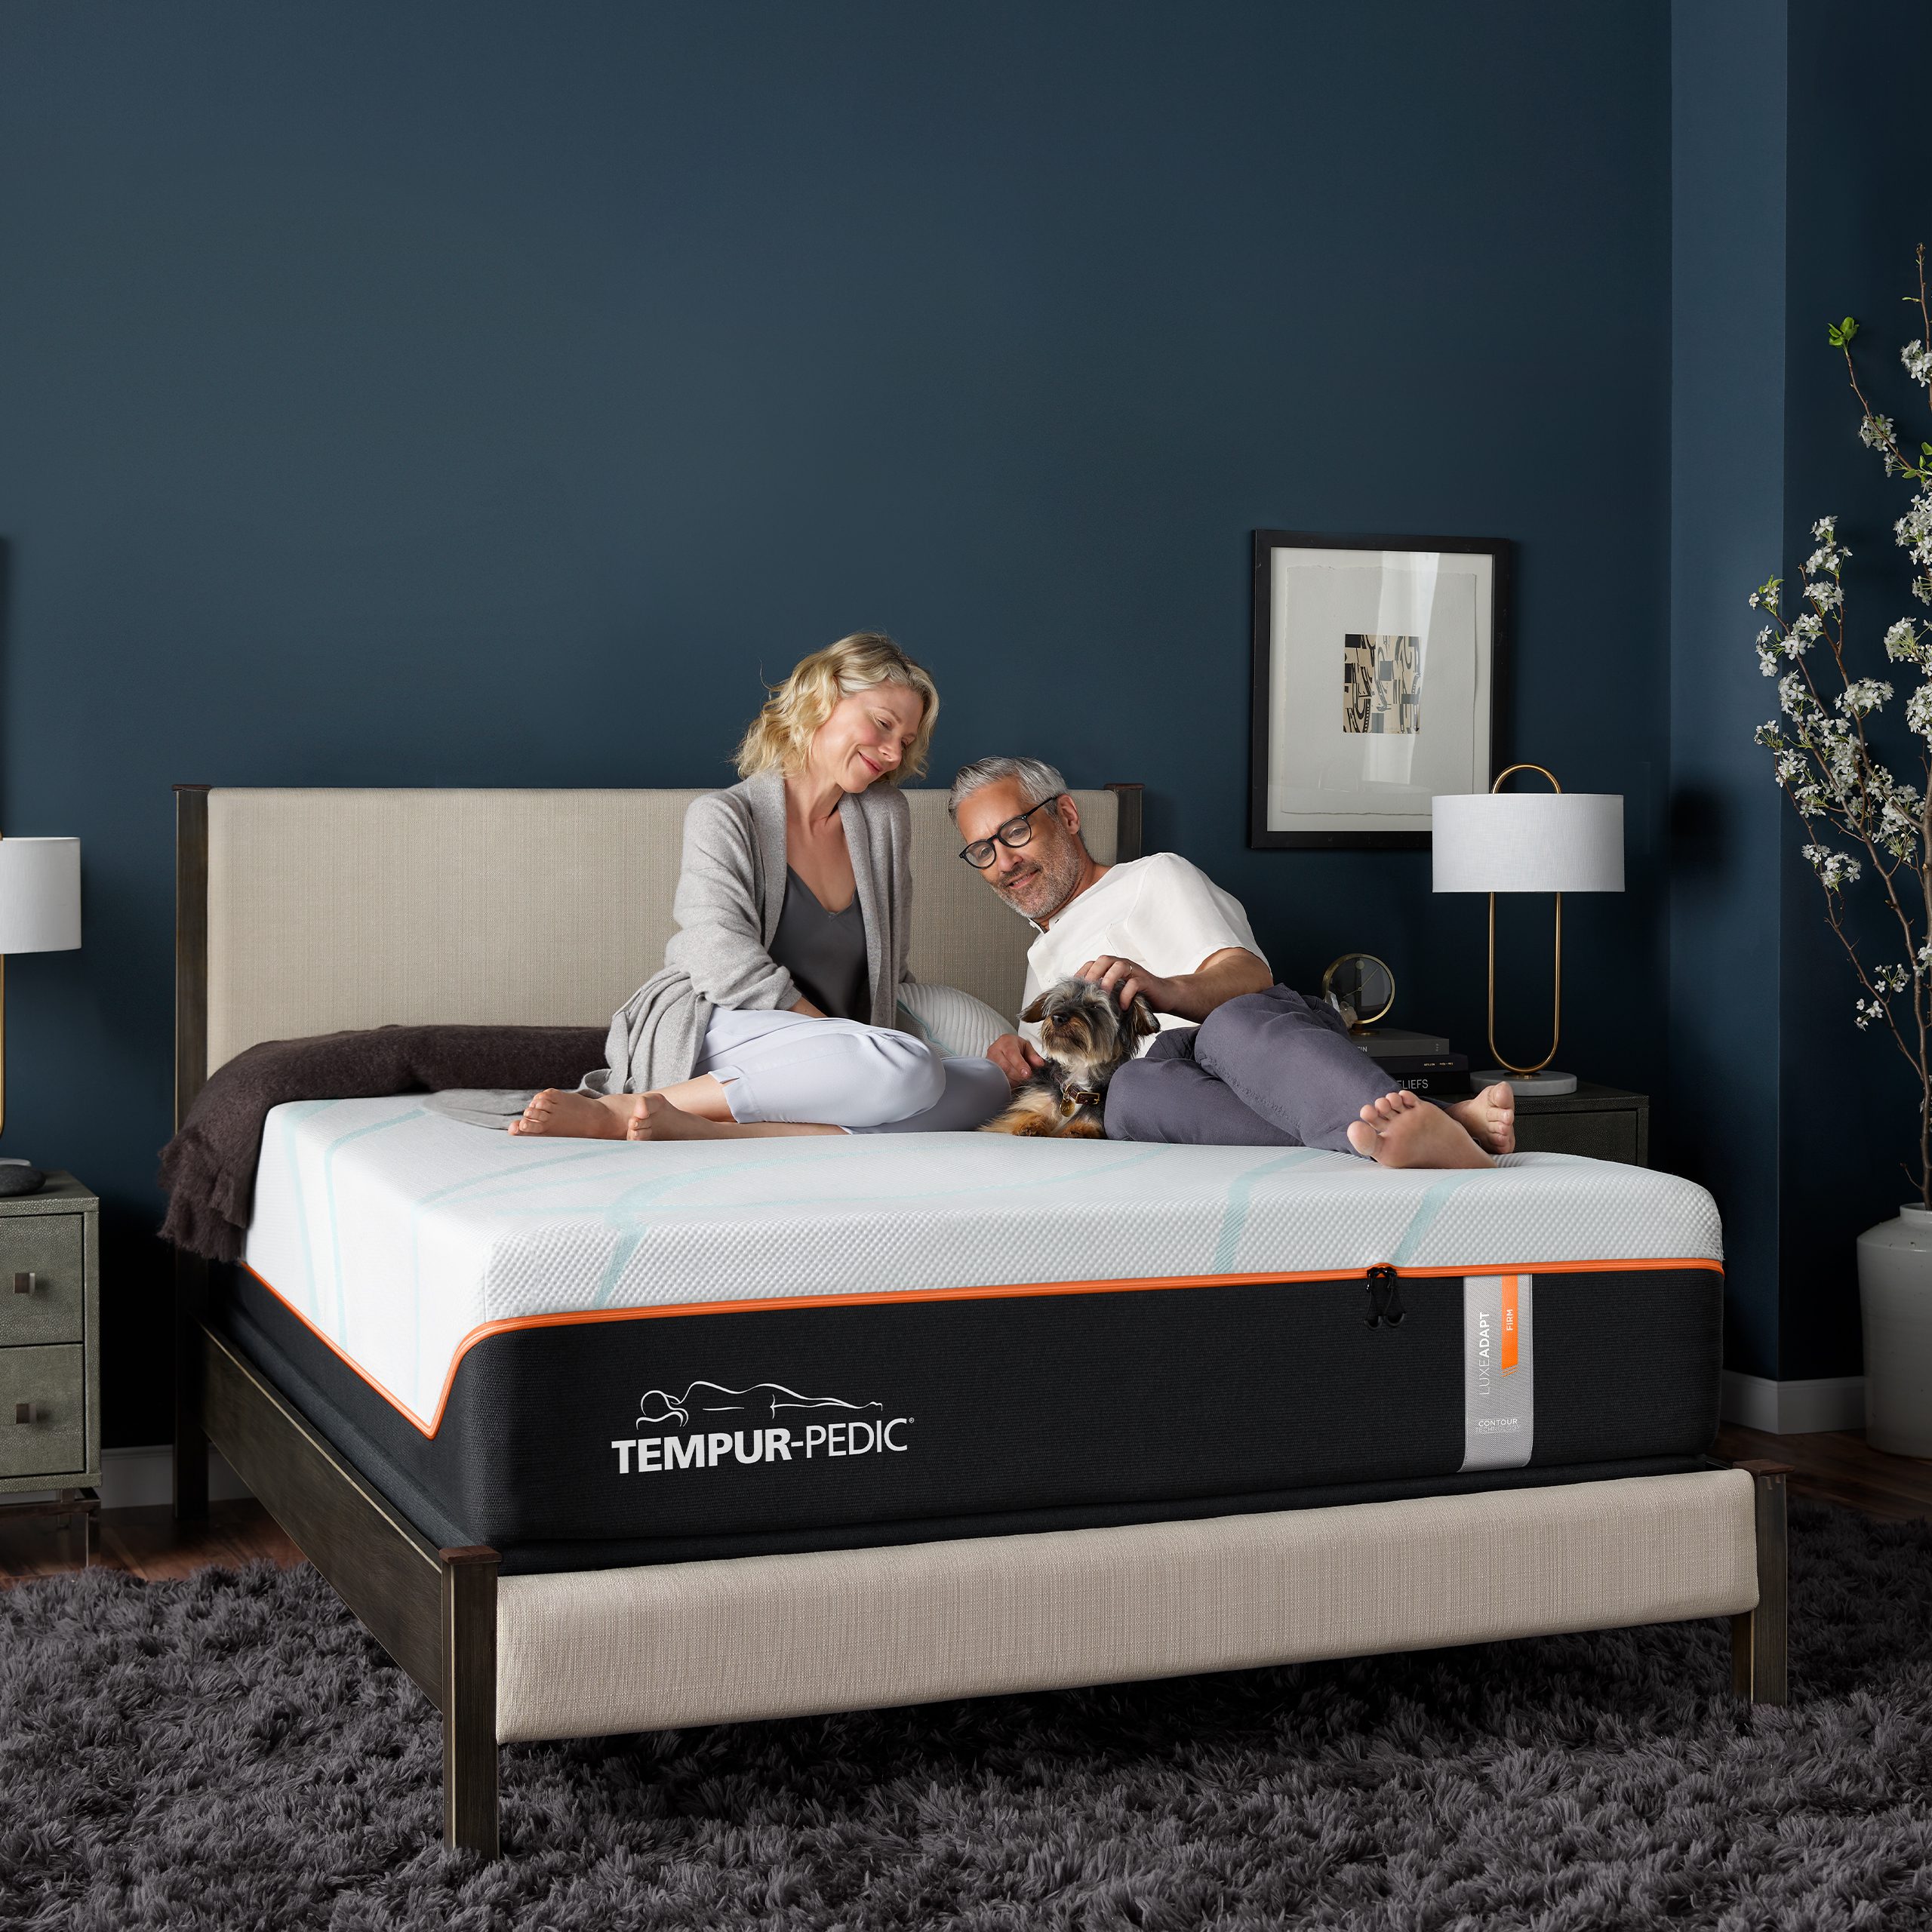 https://www.bedpros.com/wp-content/uploads/2020/05/LuxeAdapt-Firm_Lifestyle_IC2.jpg